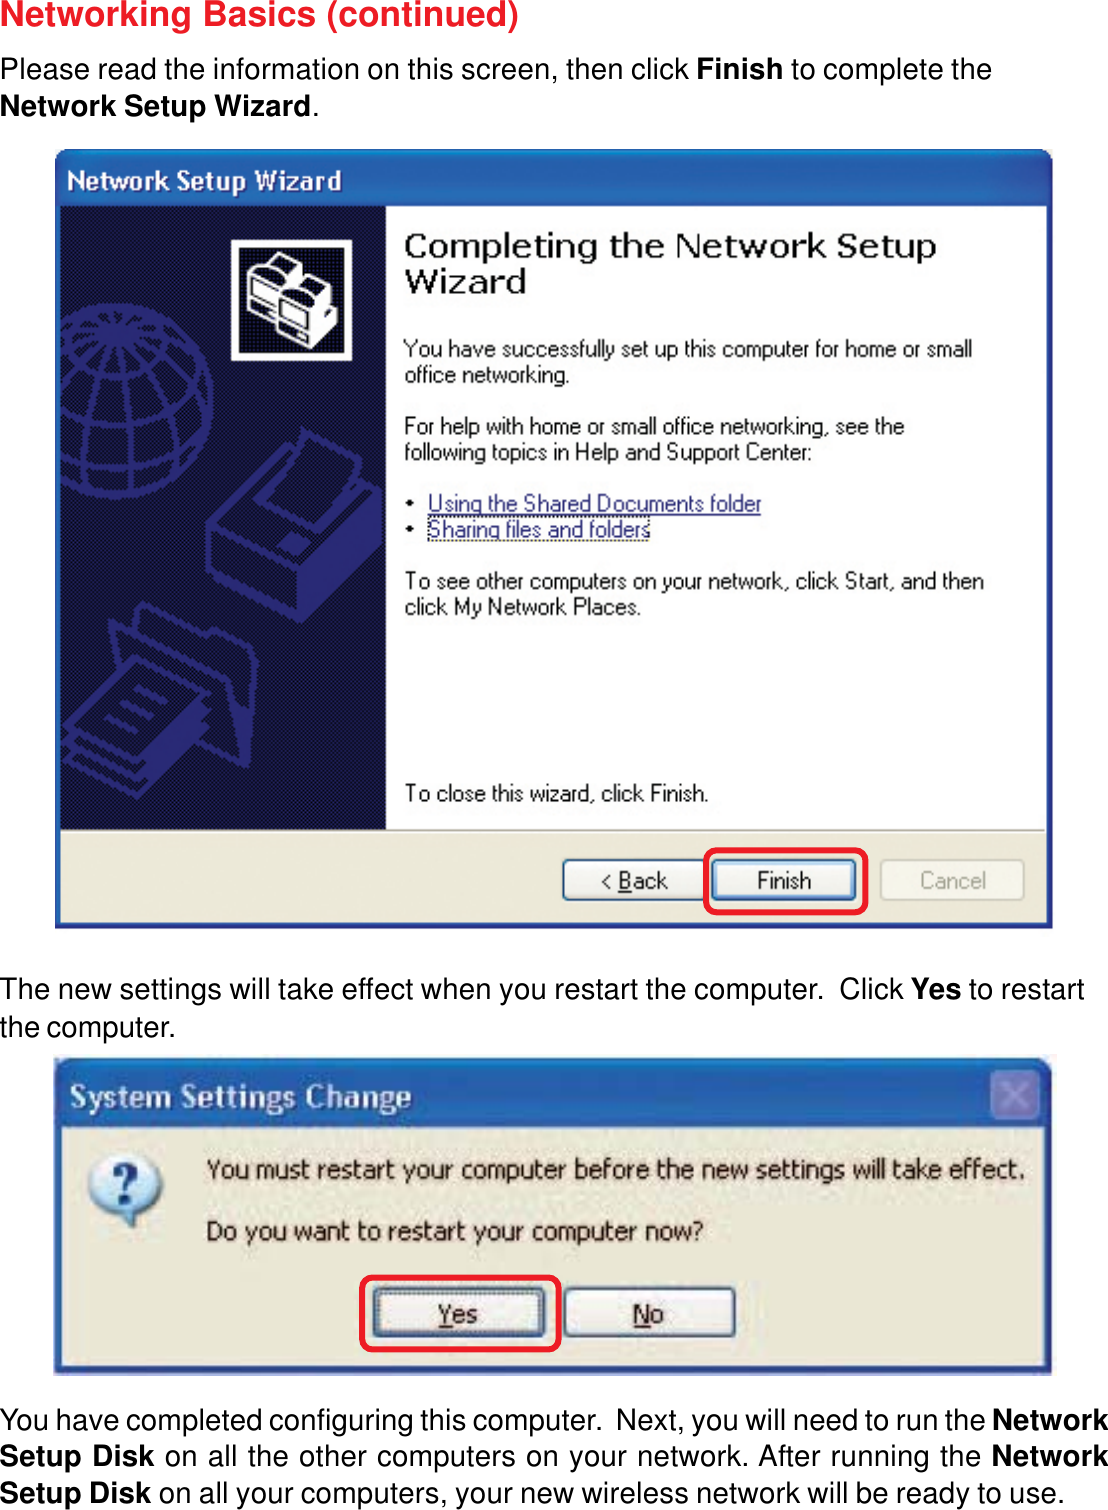 25Networking Basics (continued)Please read the information on this screen, then click Finish to complete theNetwork Setup Wizard.The new settings will take effect when you restart the computer.  Click Yes to restartthe computer.You have completed configuring this computer.  Next, you will need to run the NetworkSetup Disk on all the other computers on your network. After running the NetworkSetup Disk on all your computers, your new wireless network will be ready to use.